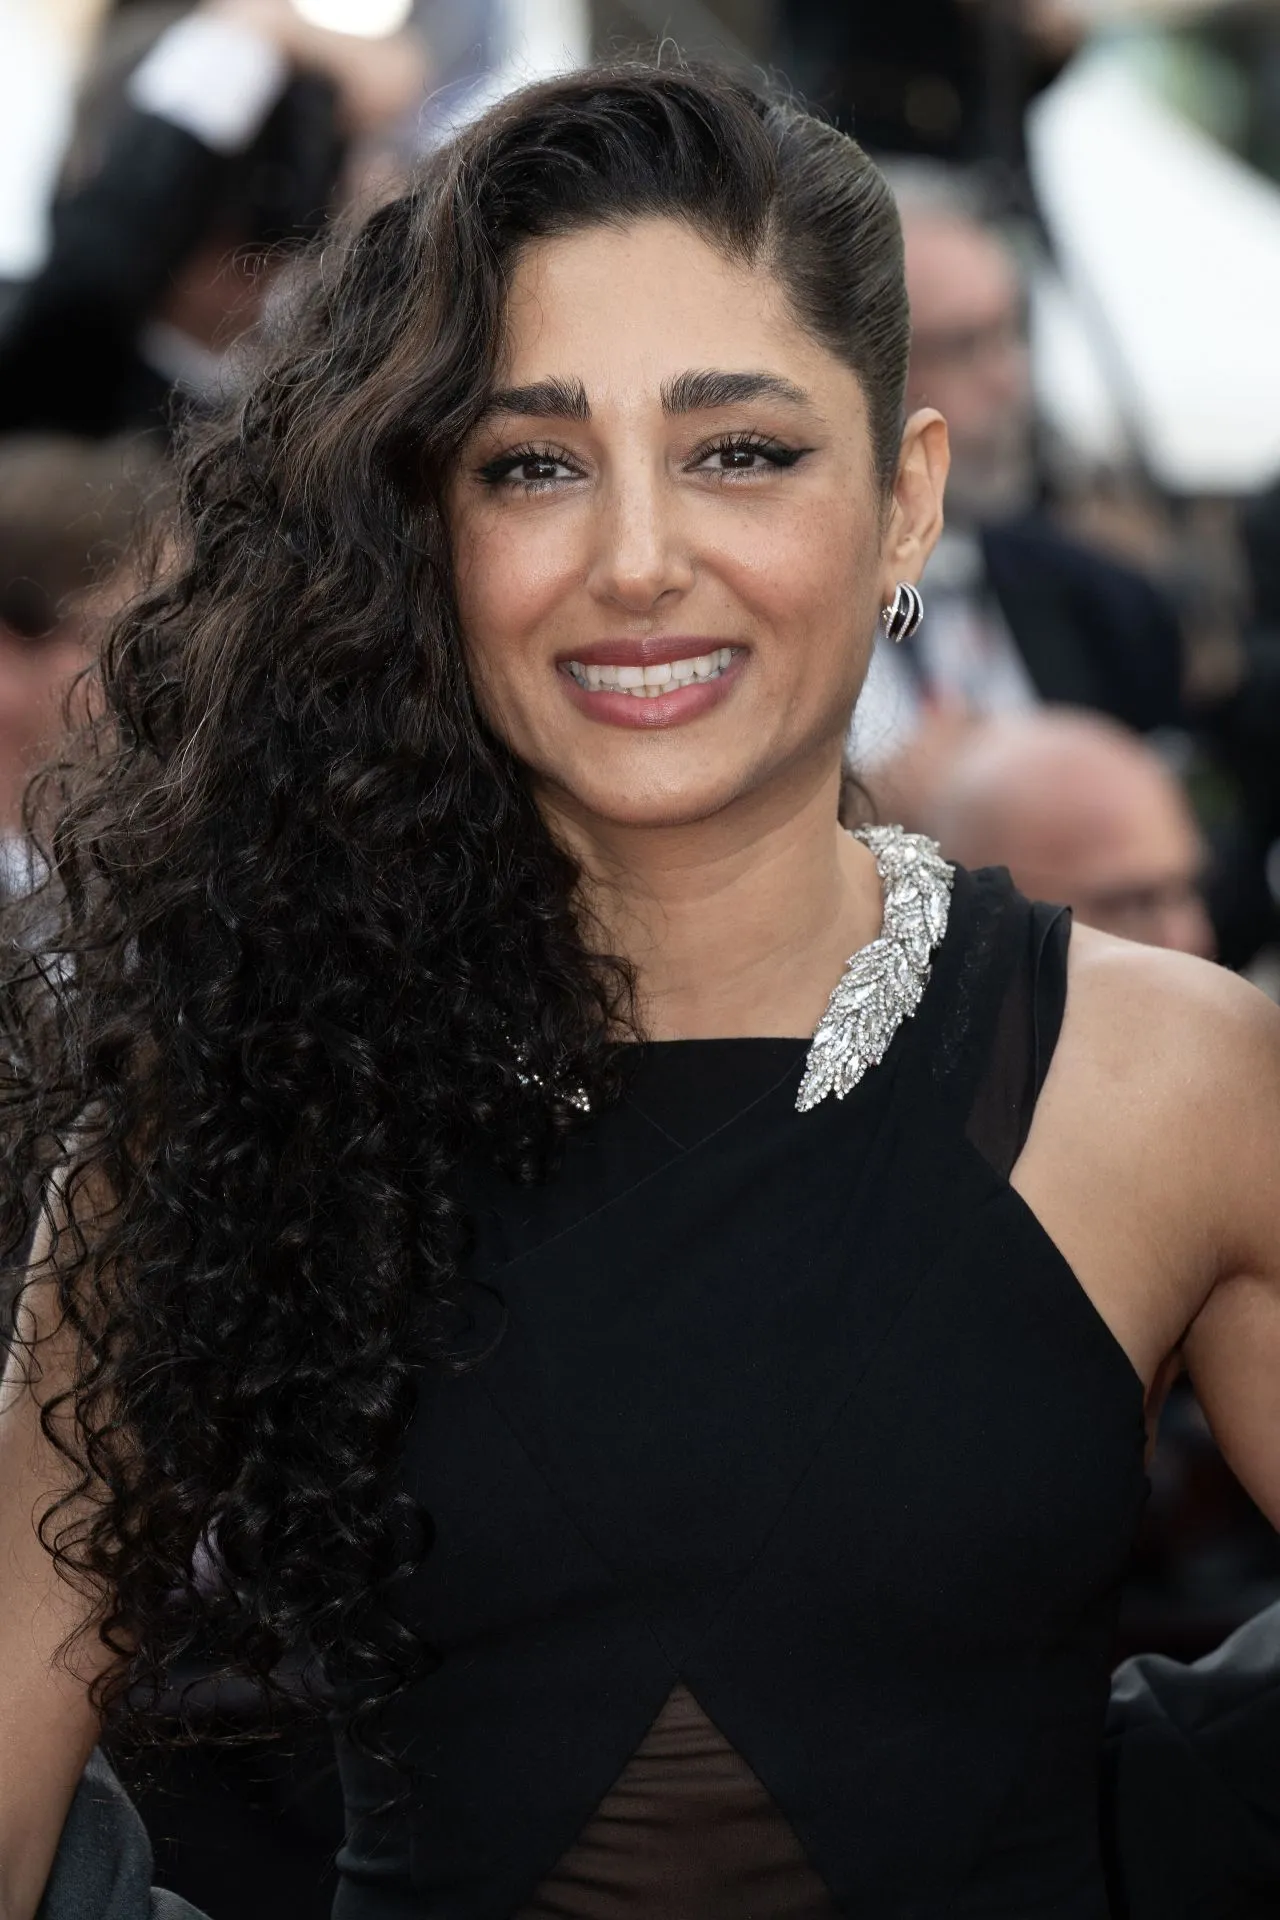 GOLSHIFTEH FARAHANI AT THE MOST PRECIOUS OF CARGOES PREMIERE AT CANNES FILM FESTIVAL1